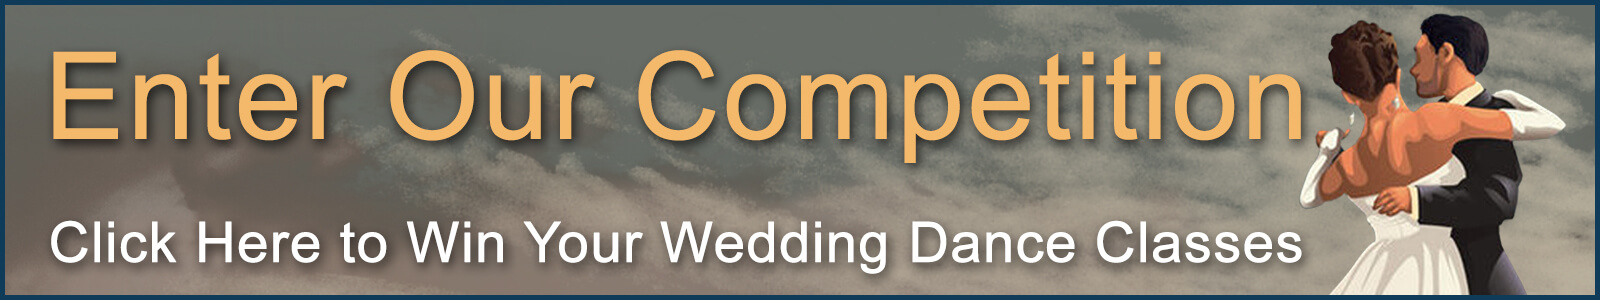 enter our competition and win your wedding dance lessons free